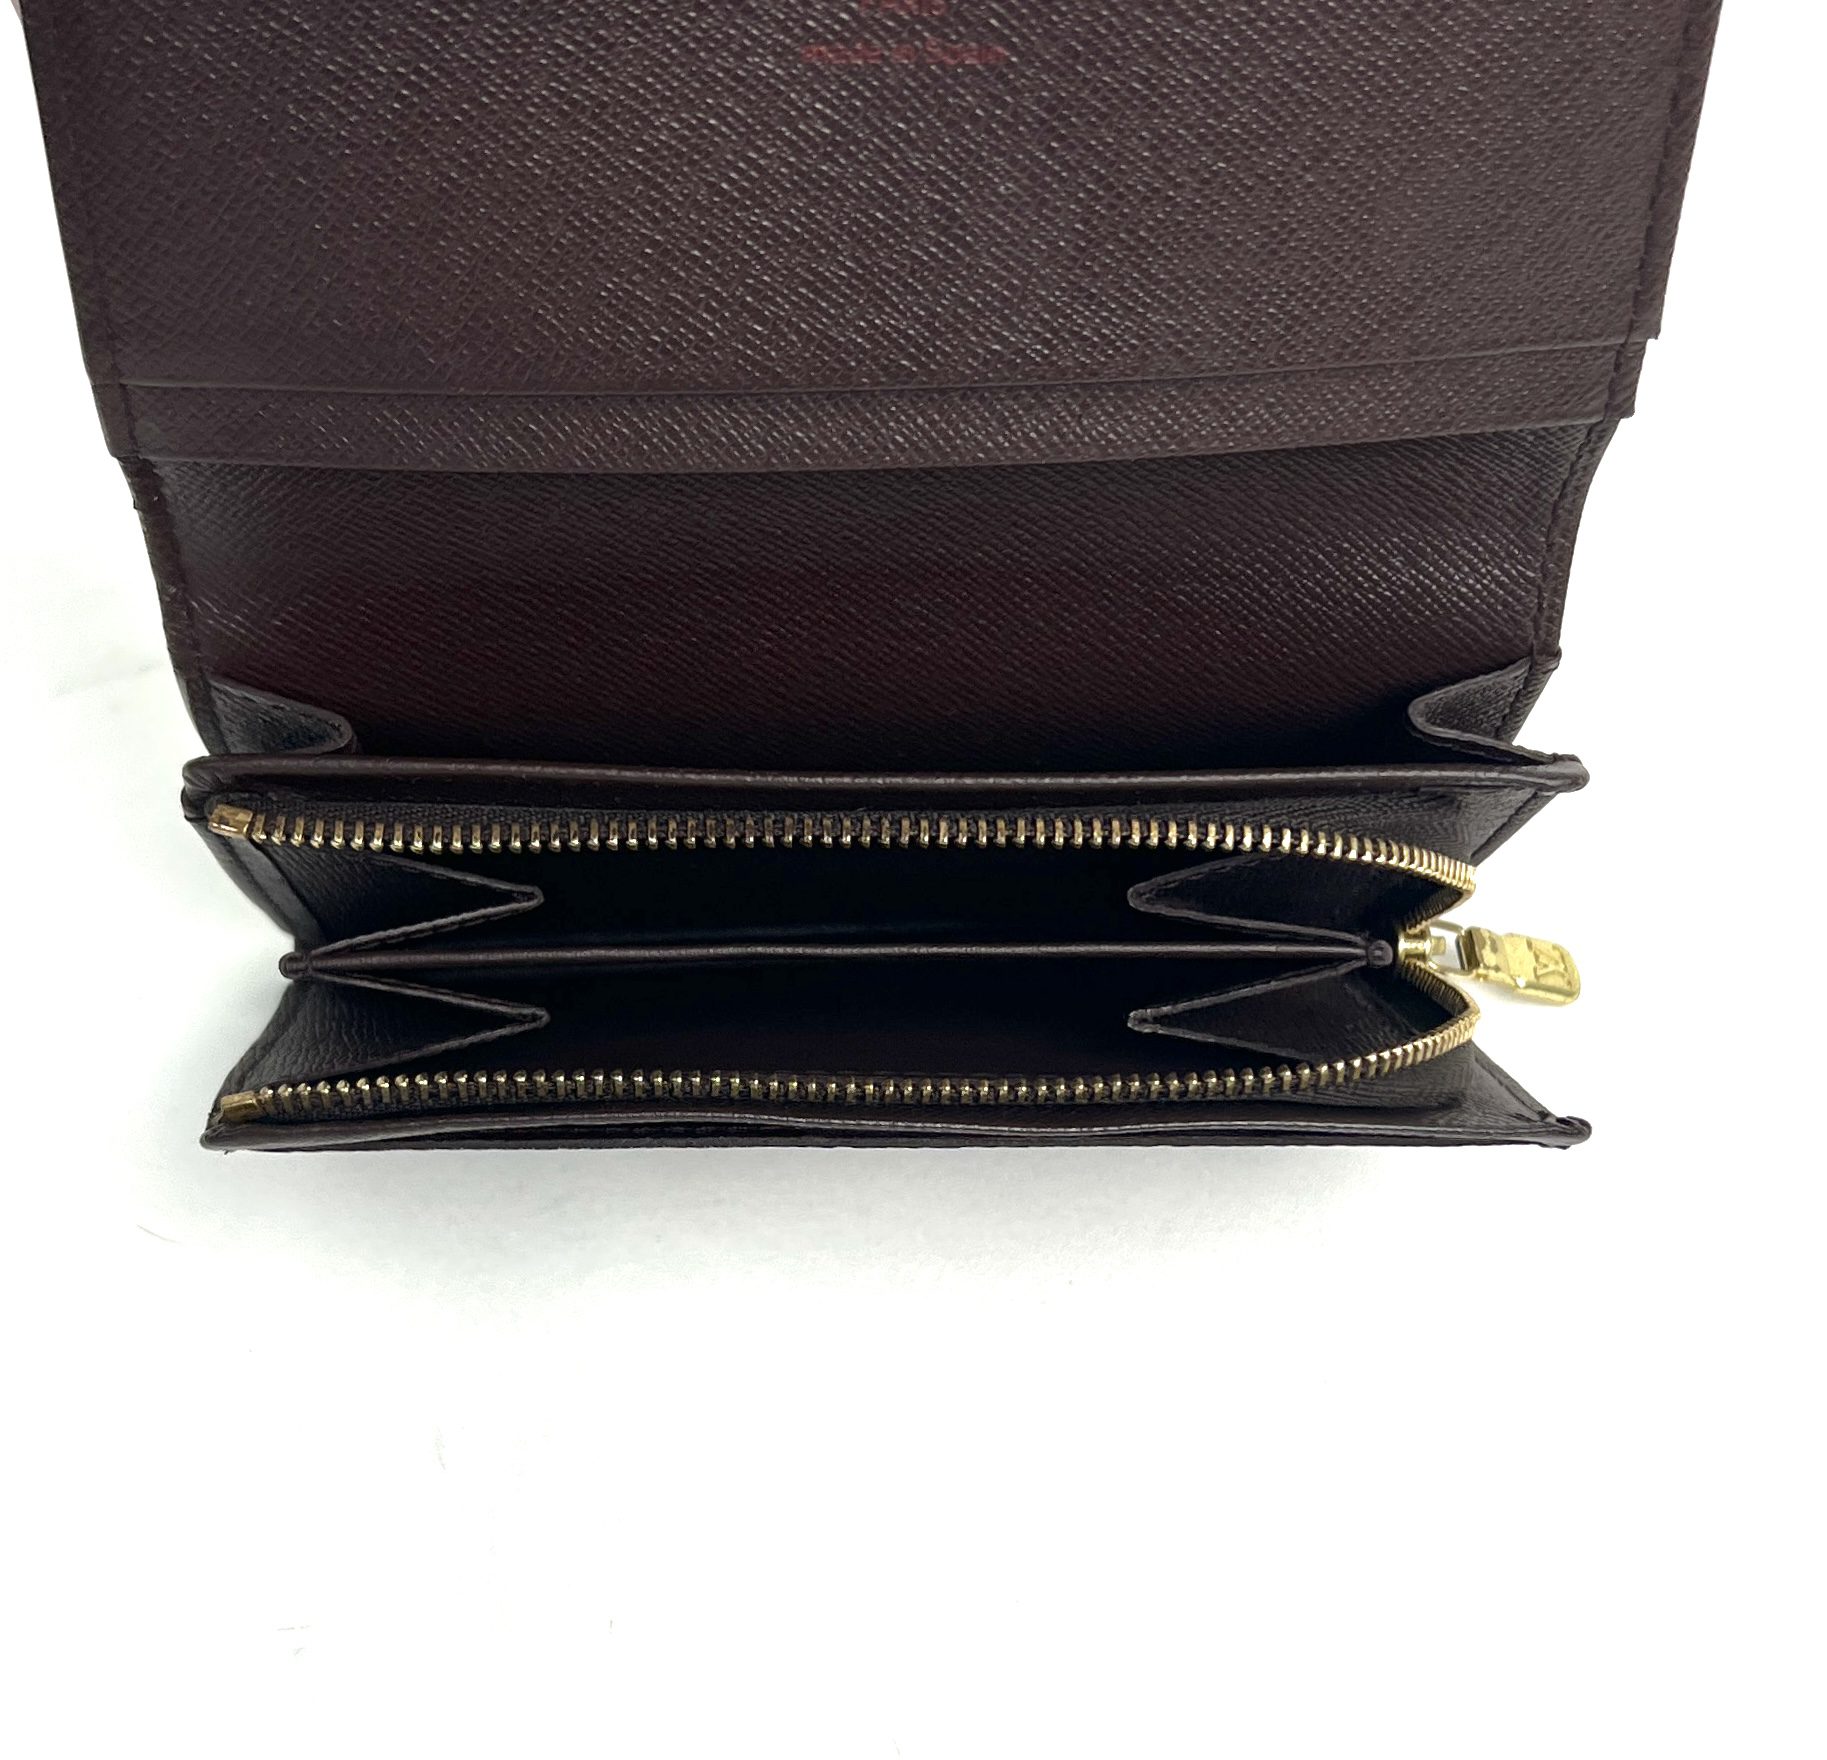 Buy [Used] LOUIS VUITTON Portefeuille Metis Compact Trifold Wallet